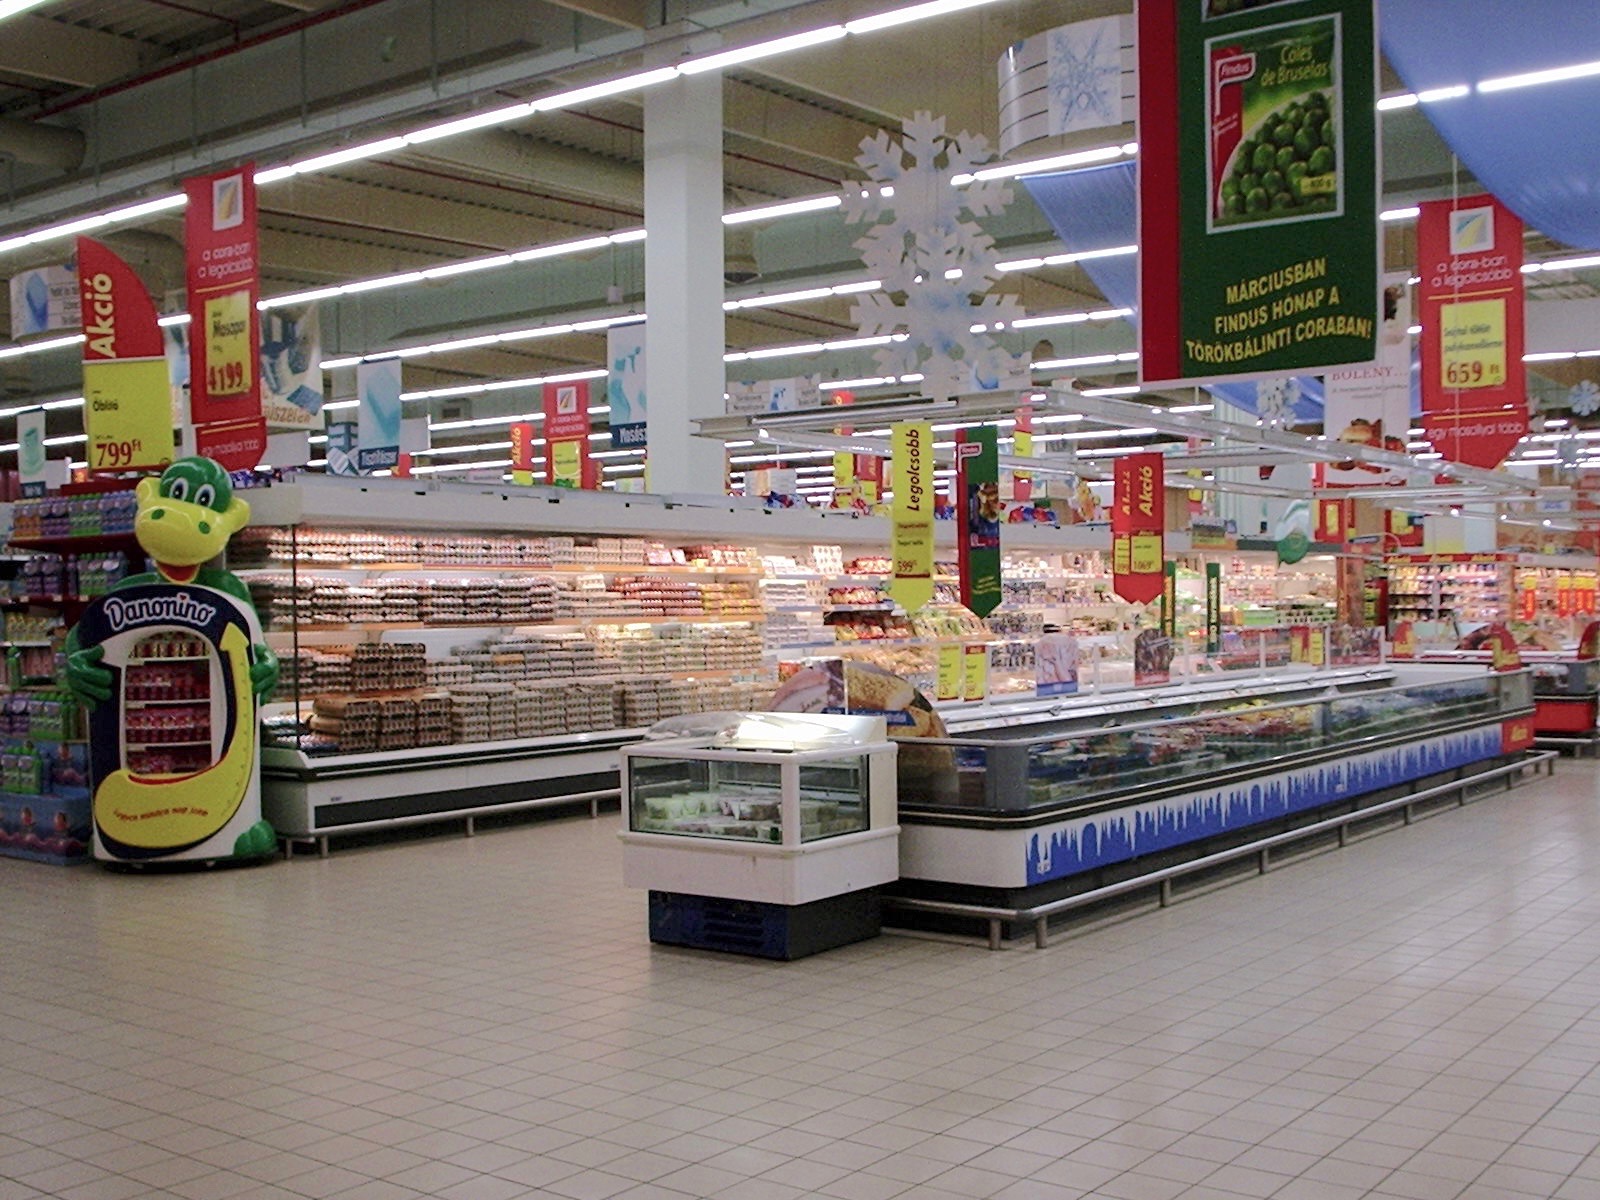 A well-stocked, empty supermarket before the pandemic. (Photo by tes from FreeImages)